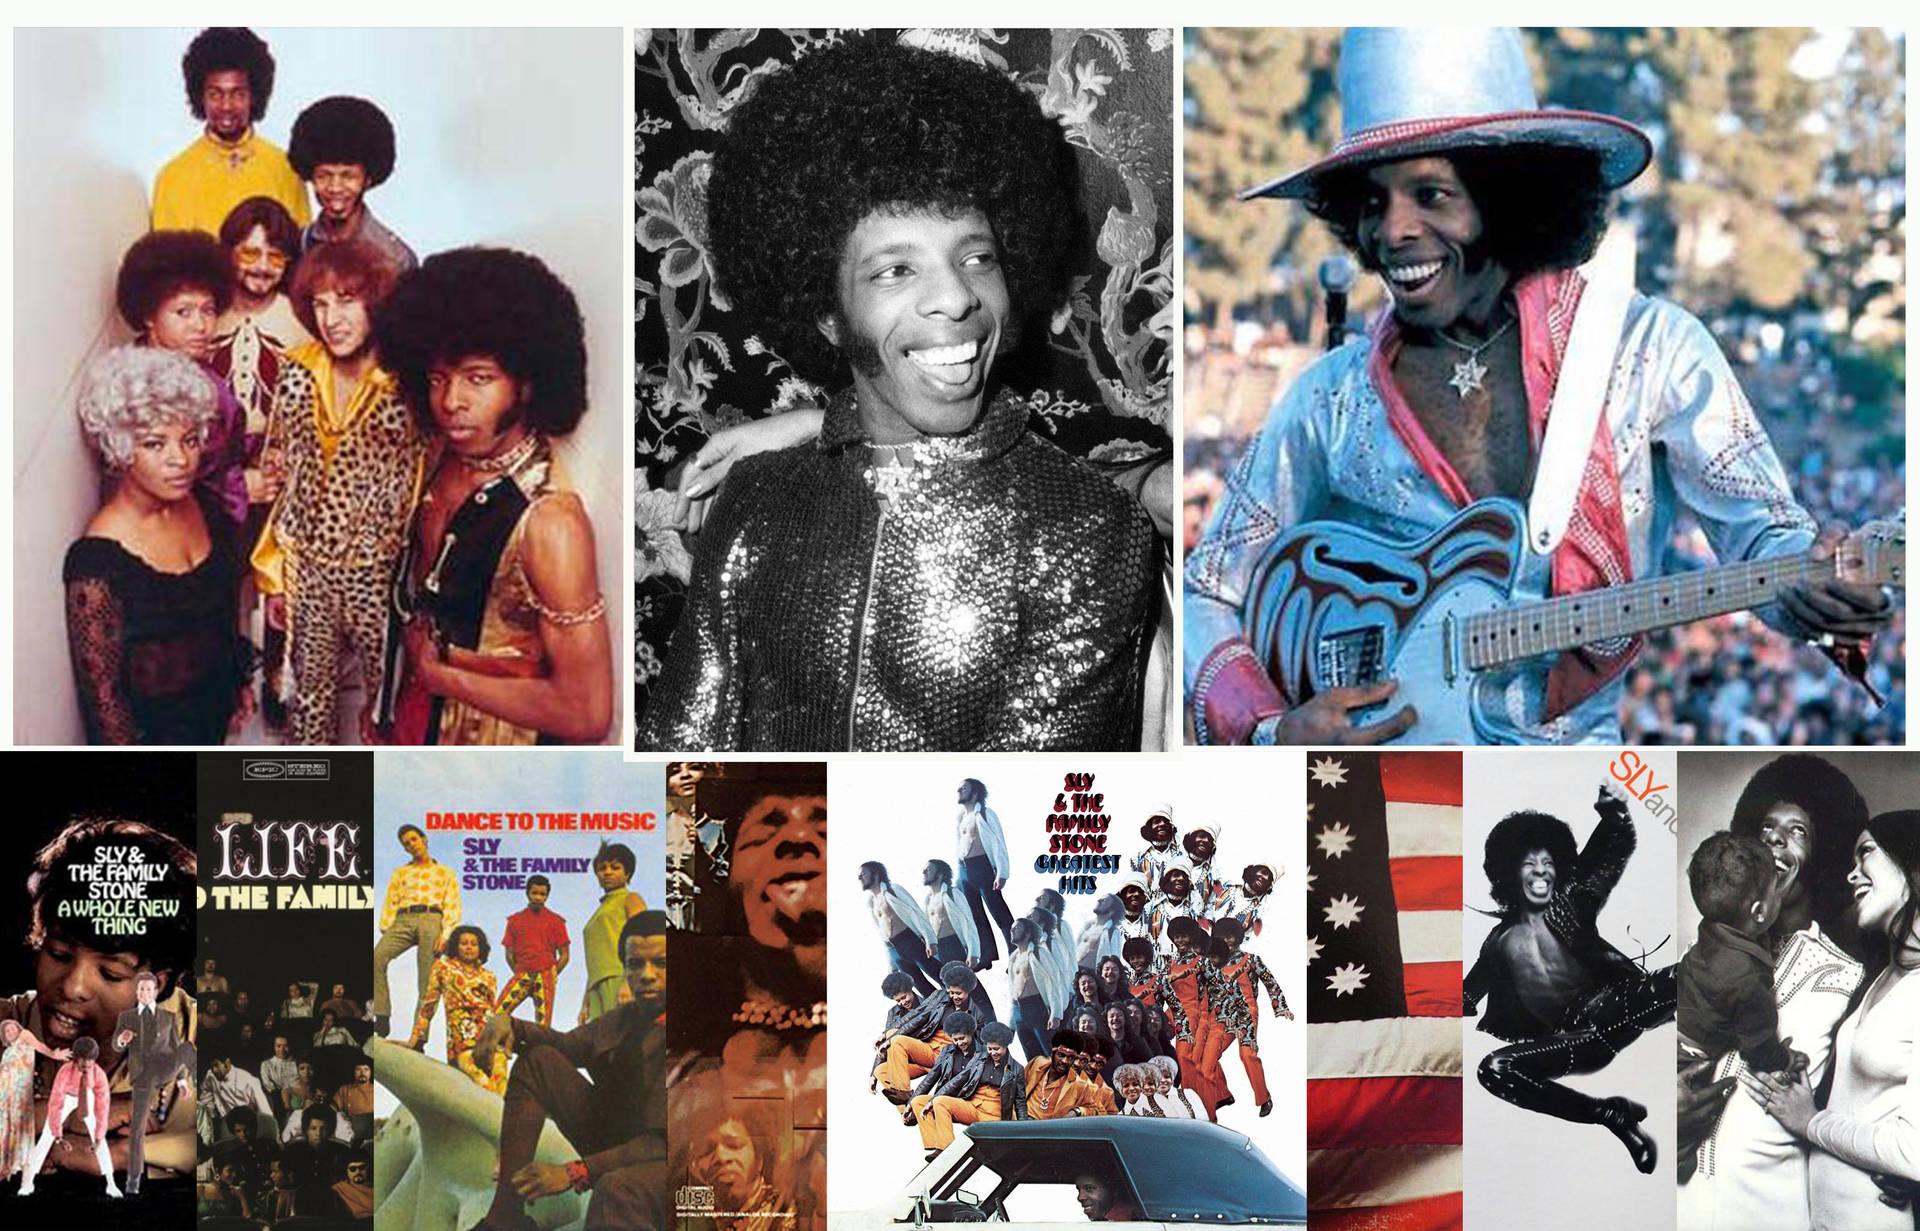 Iconic Sly and The Family Stone Band Compilation Image Wallpaper